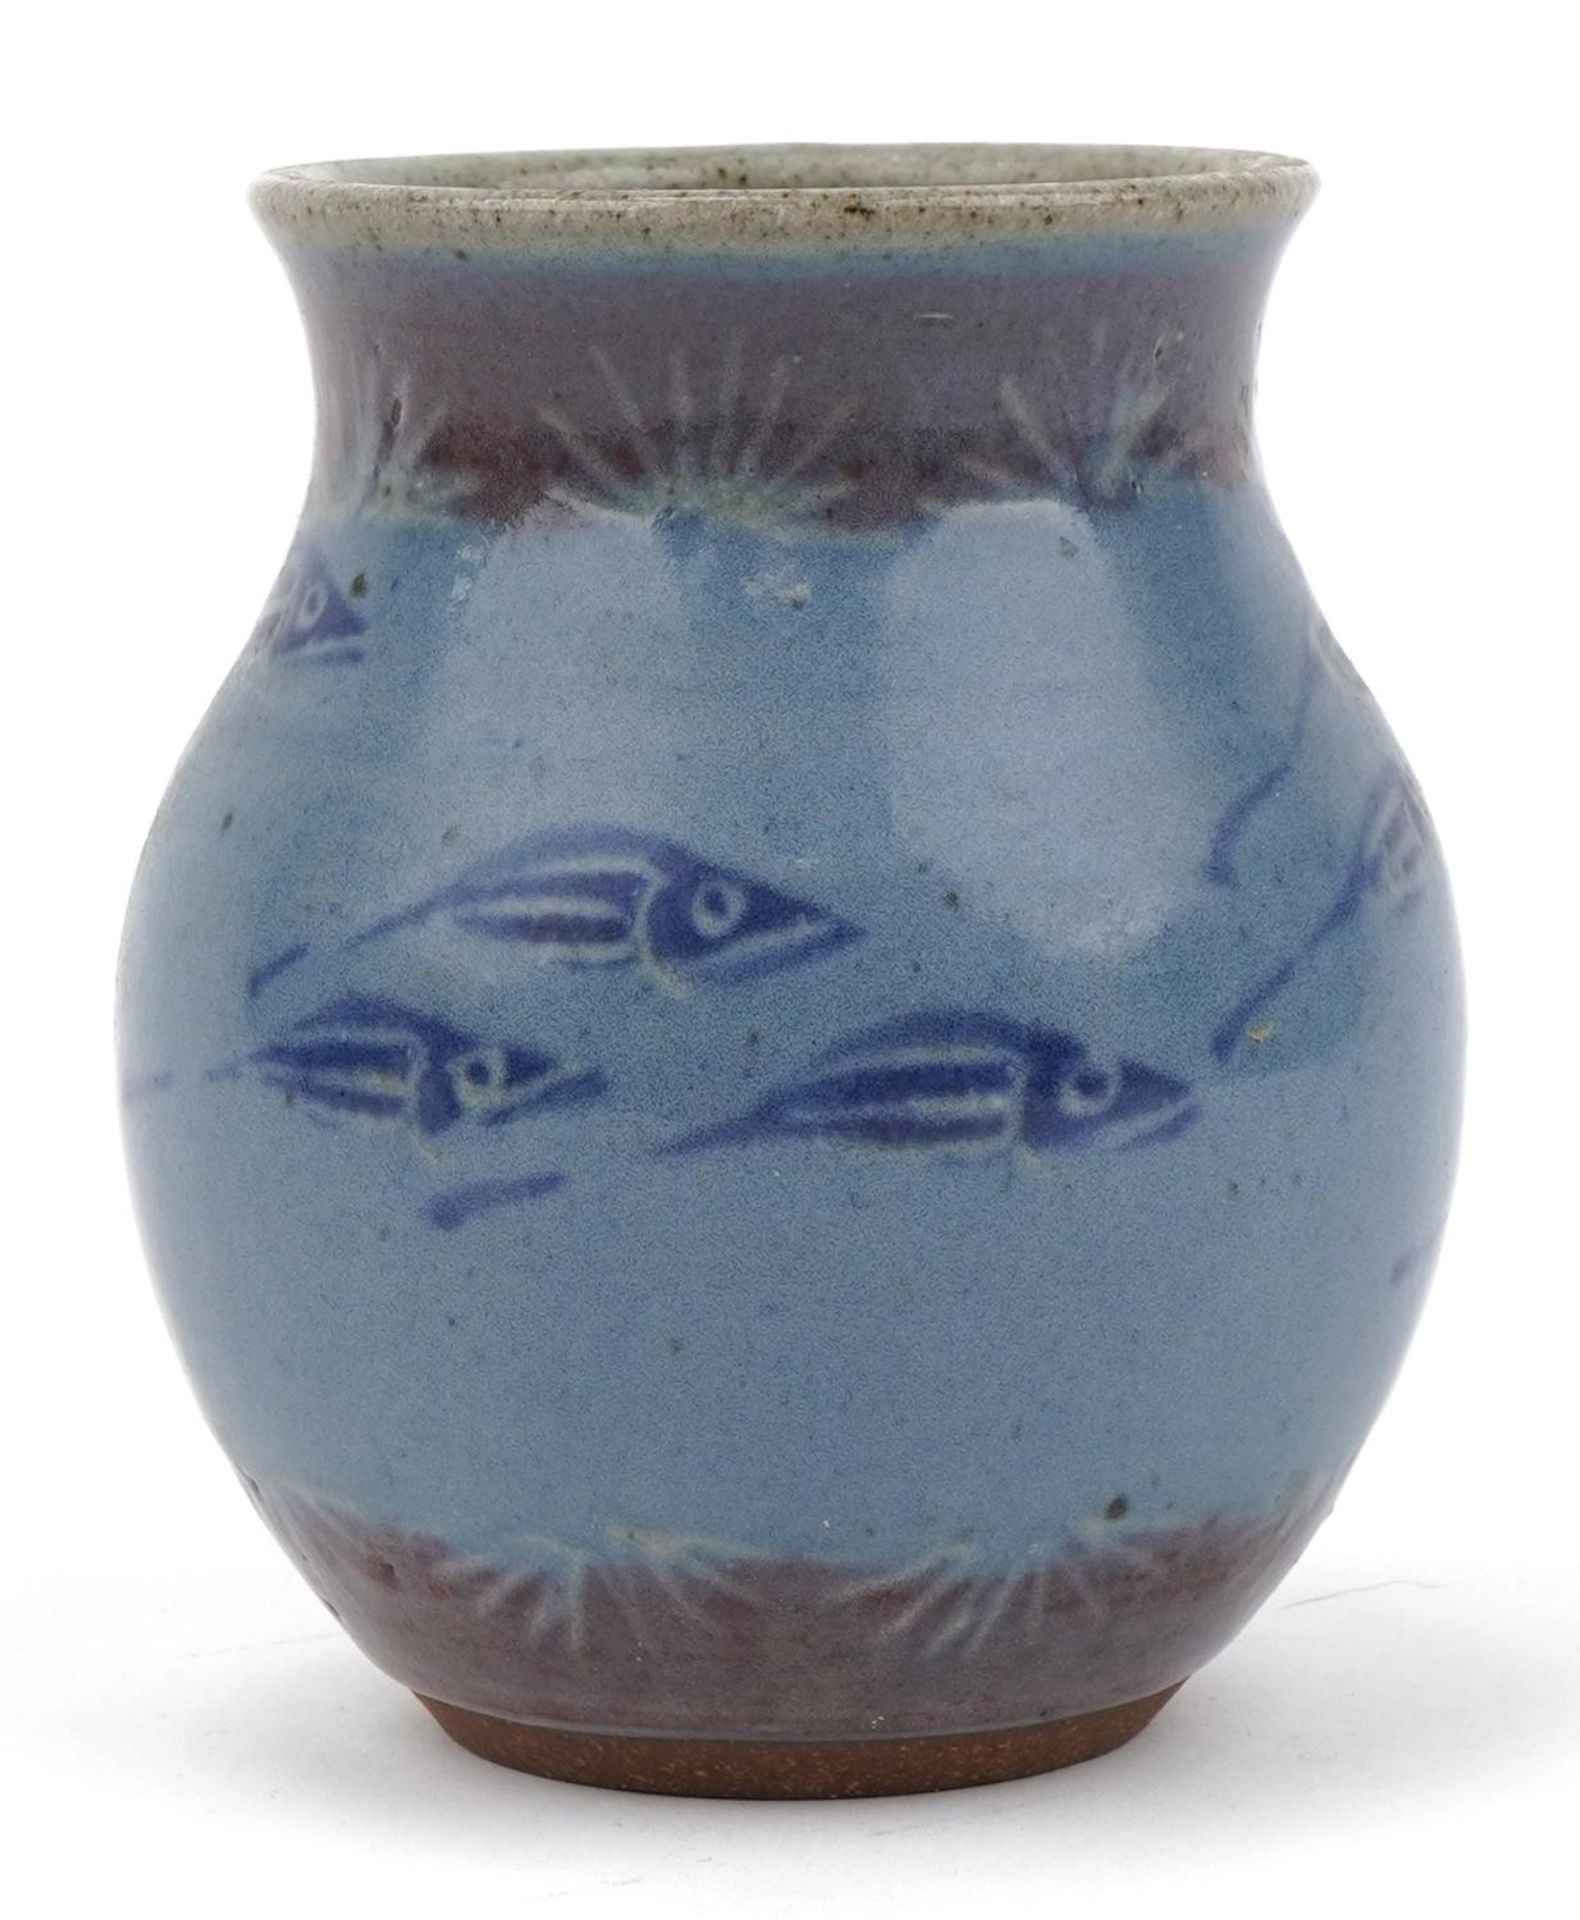 St Ives studio pottery vase hand painted with stylised fish, 12cm high - Image 3 of 6